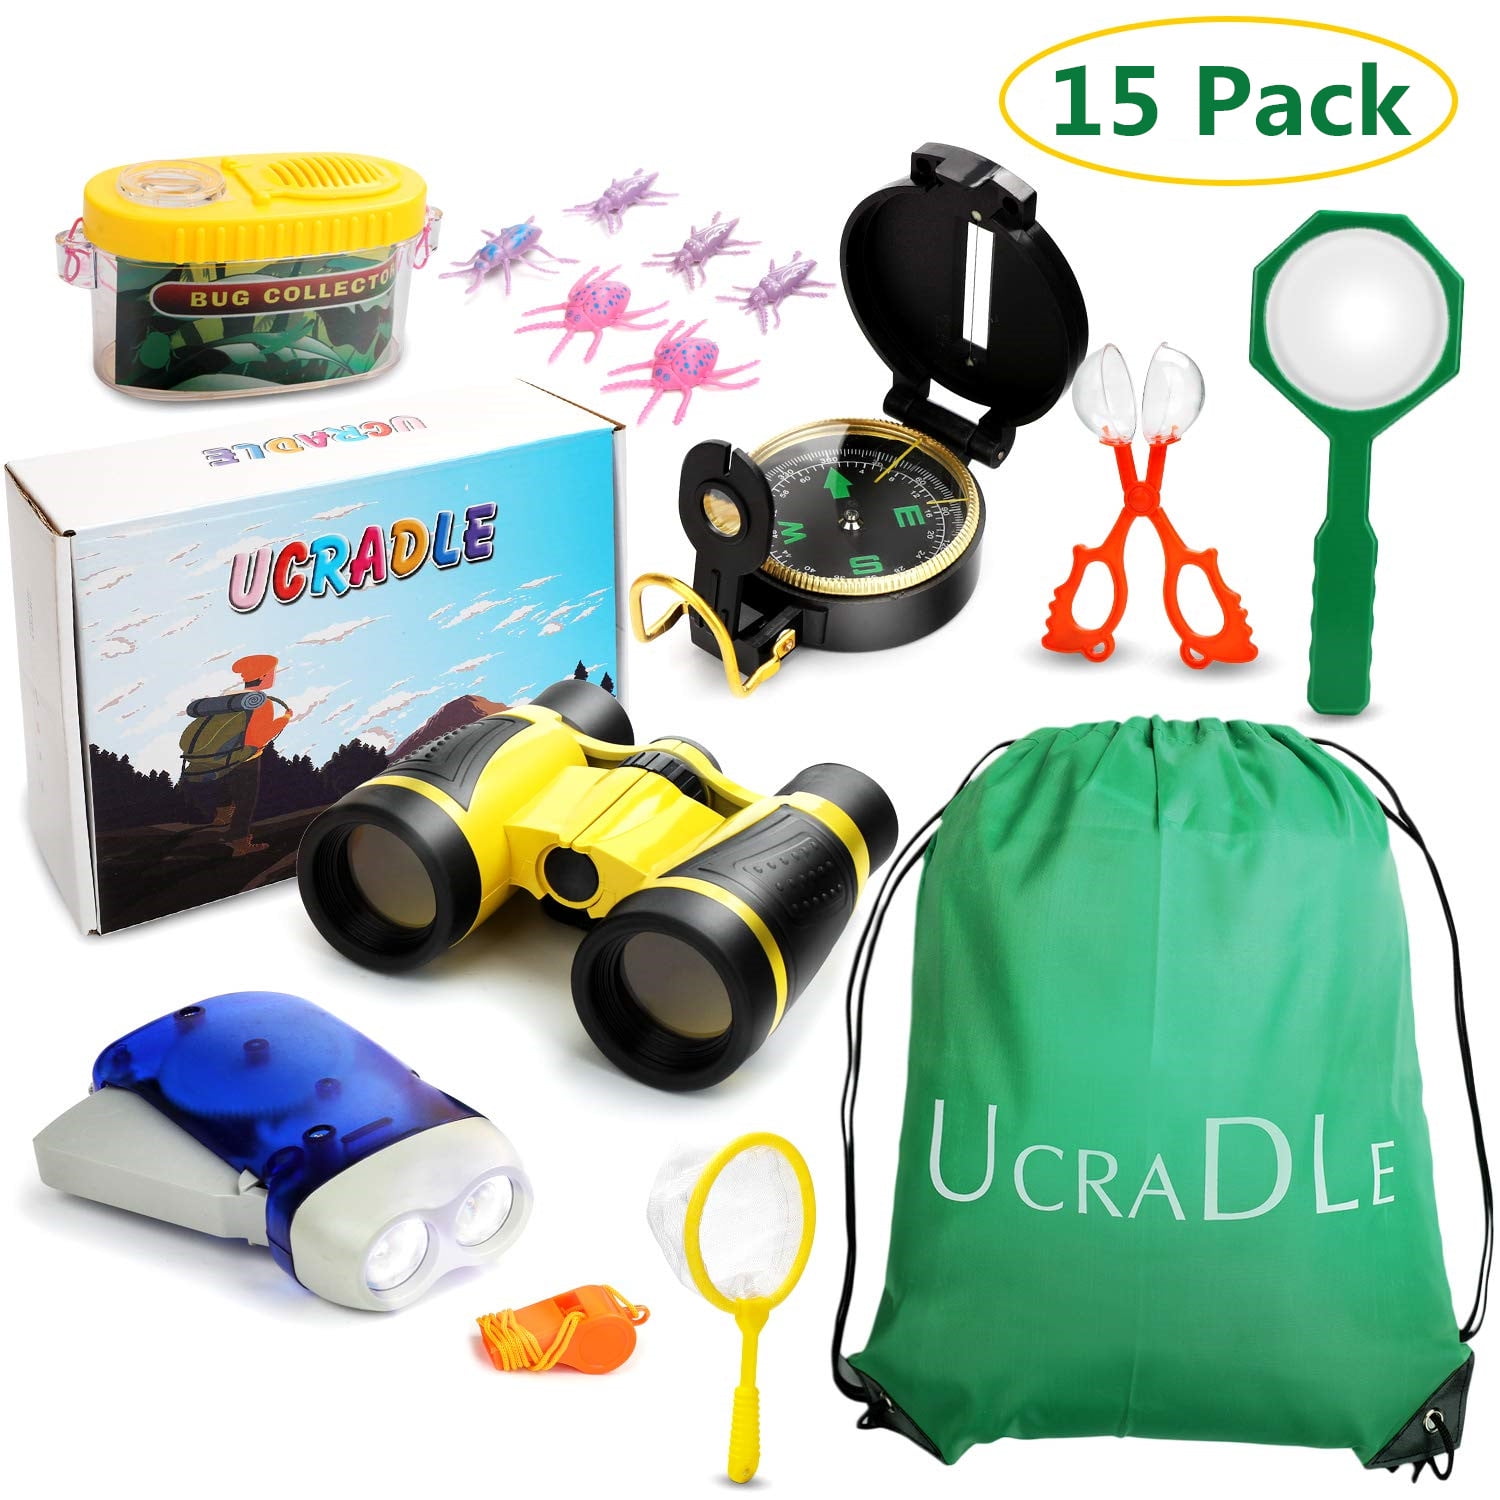 SALE The Little Gardener Bug Catcher and Viewer Discovery kit for Children 